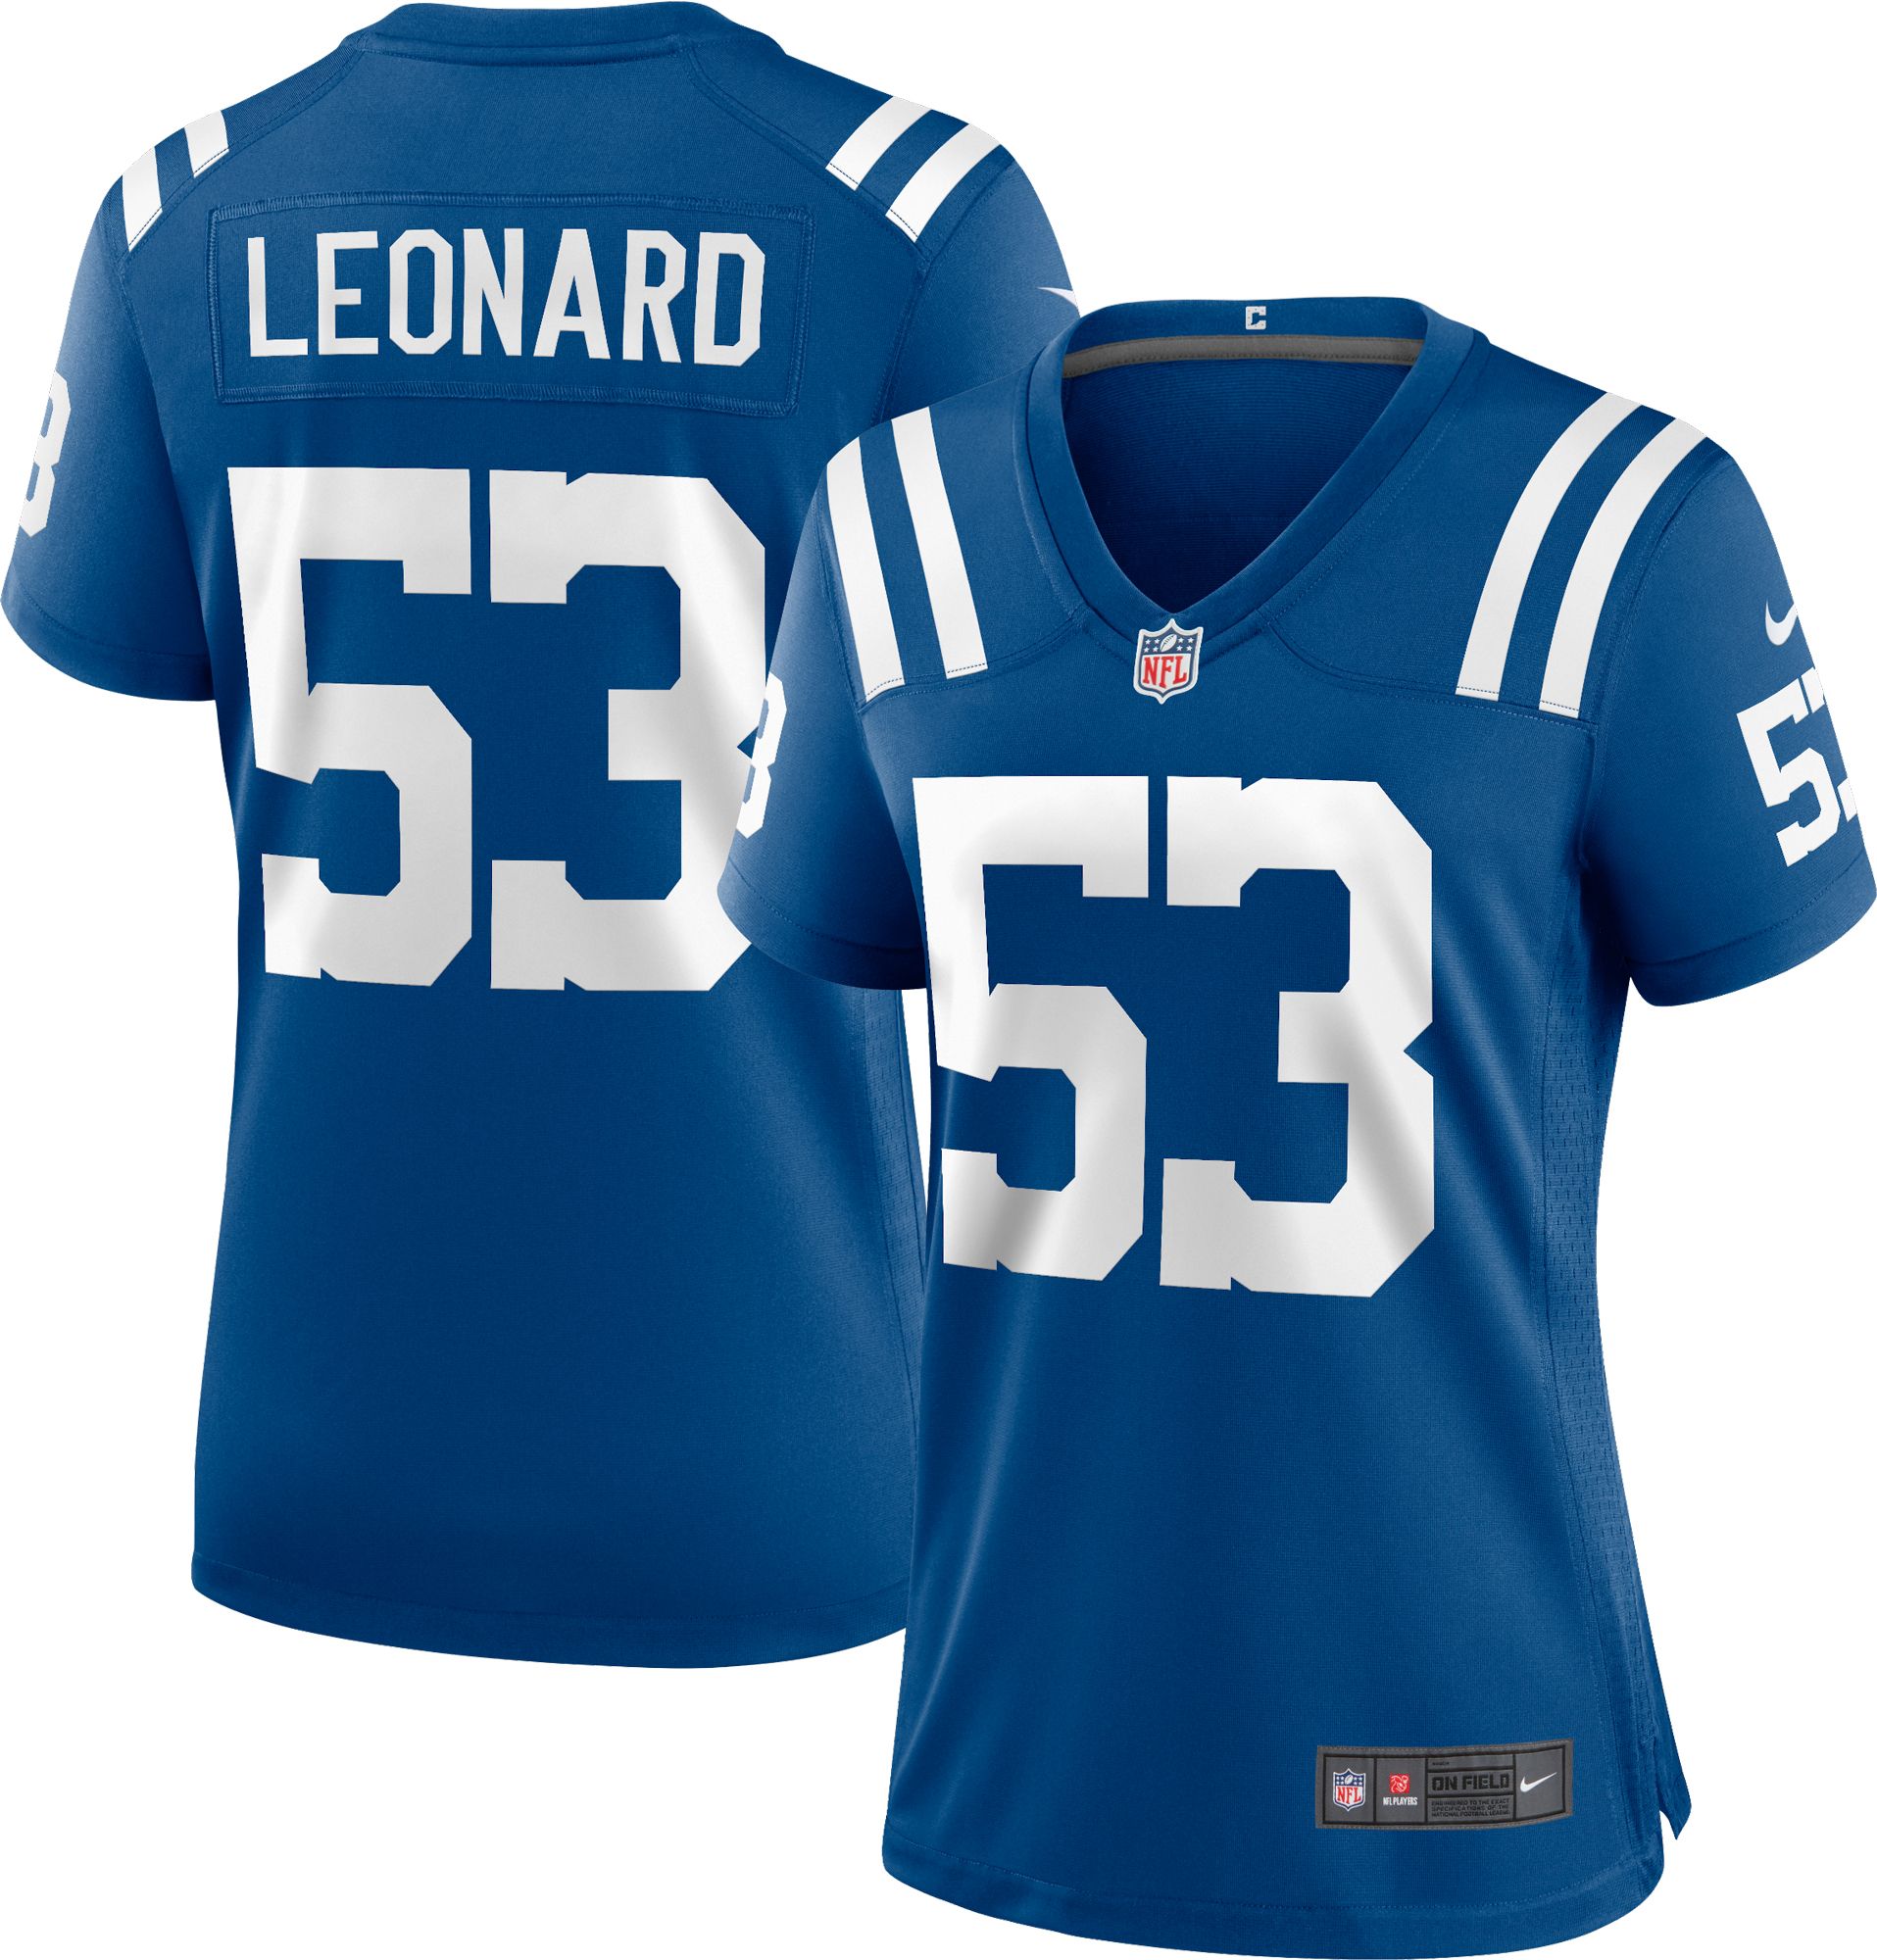 colts 53 jersey